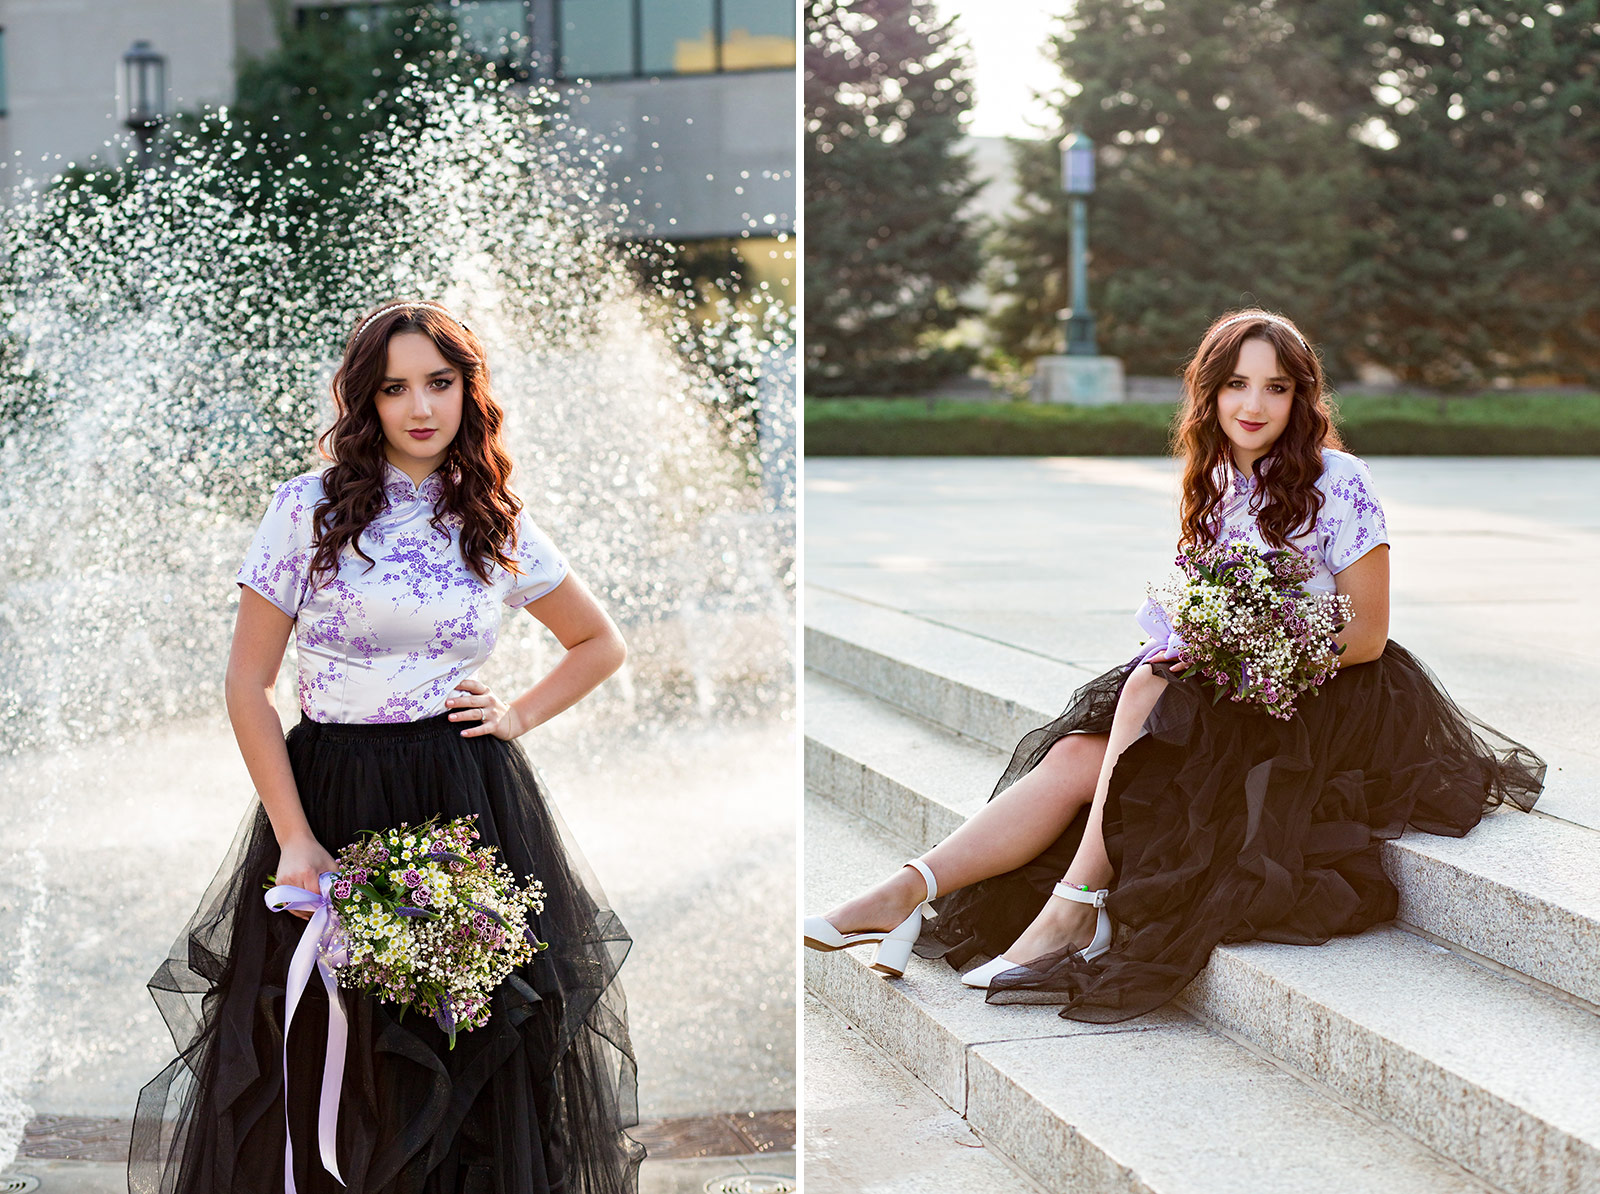 Isabella is silhouetted by glowing droplets of a fountain, and she sits on a staircase posing with her bouquet.